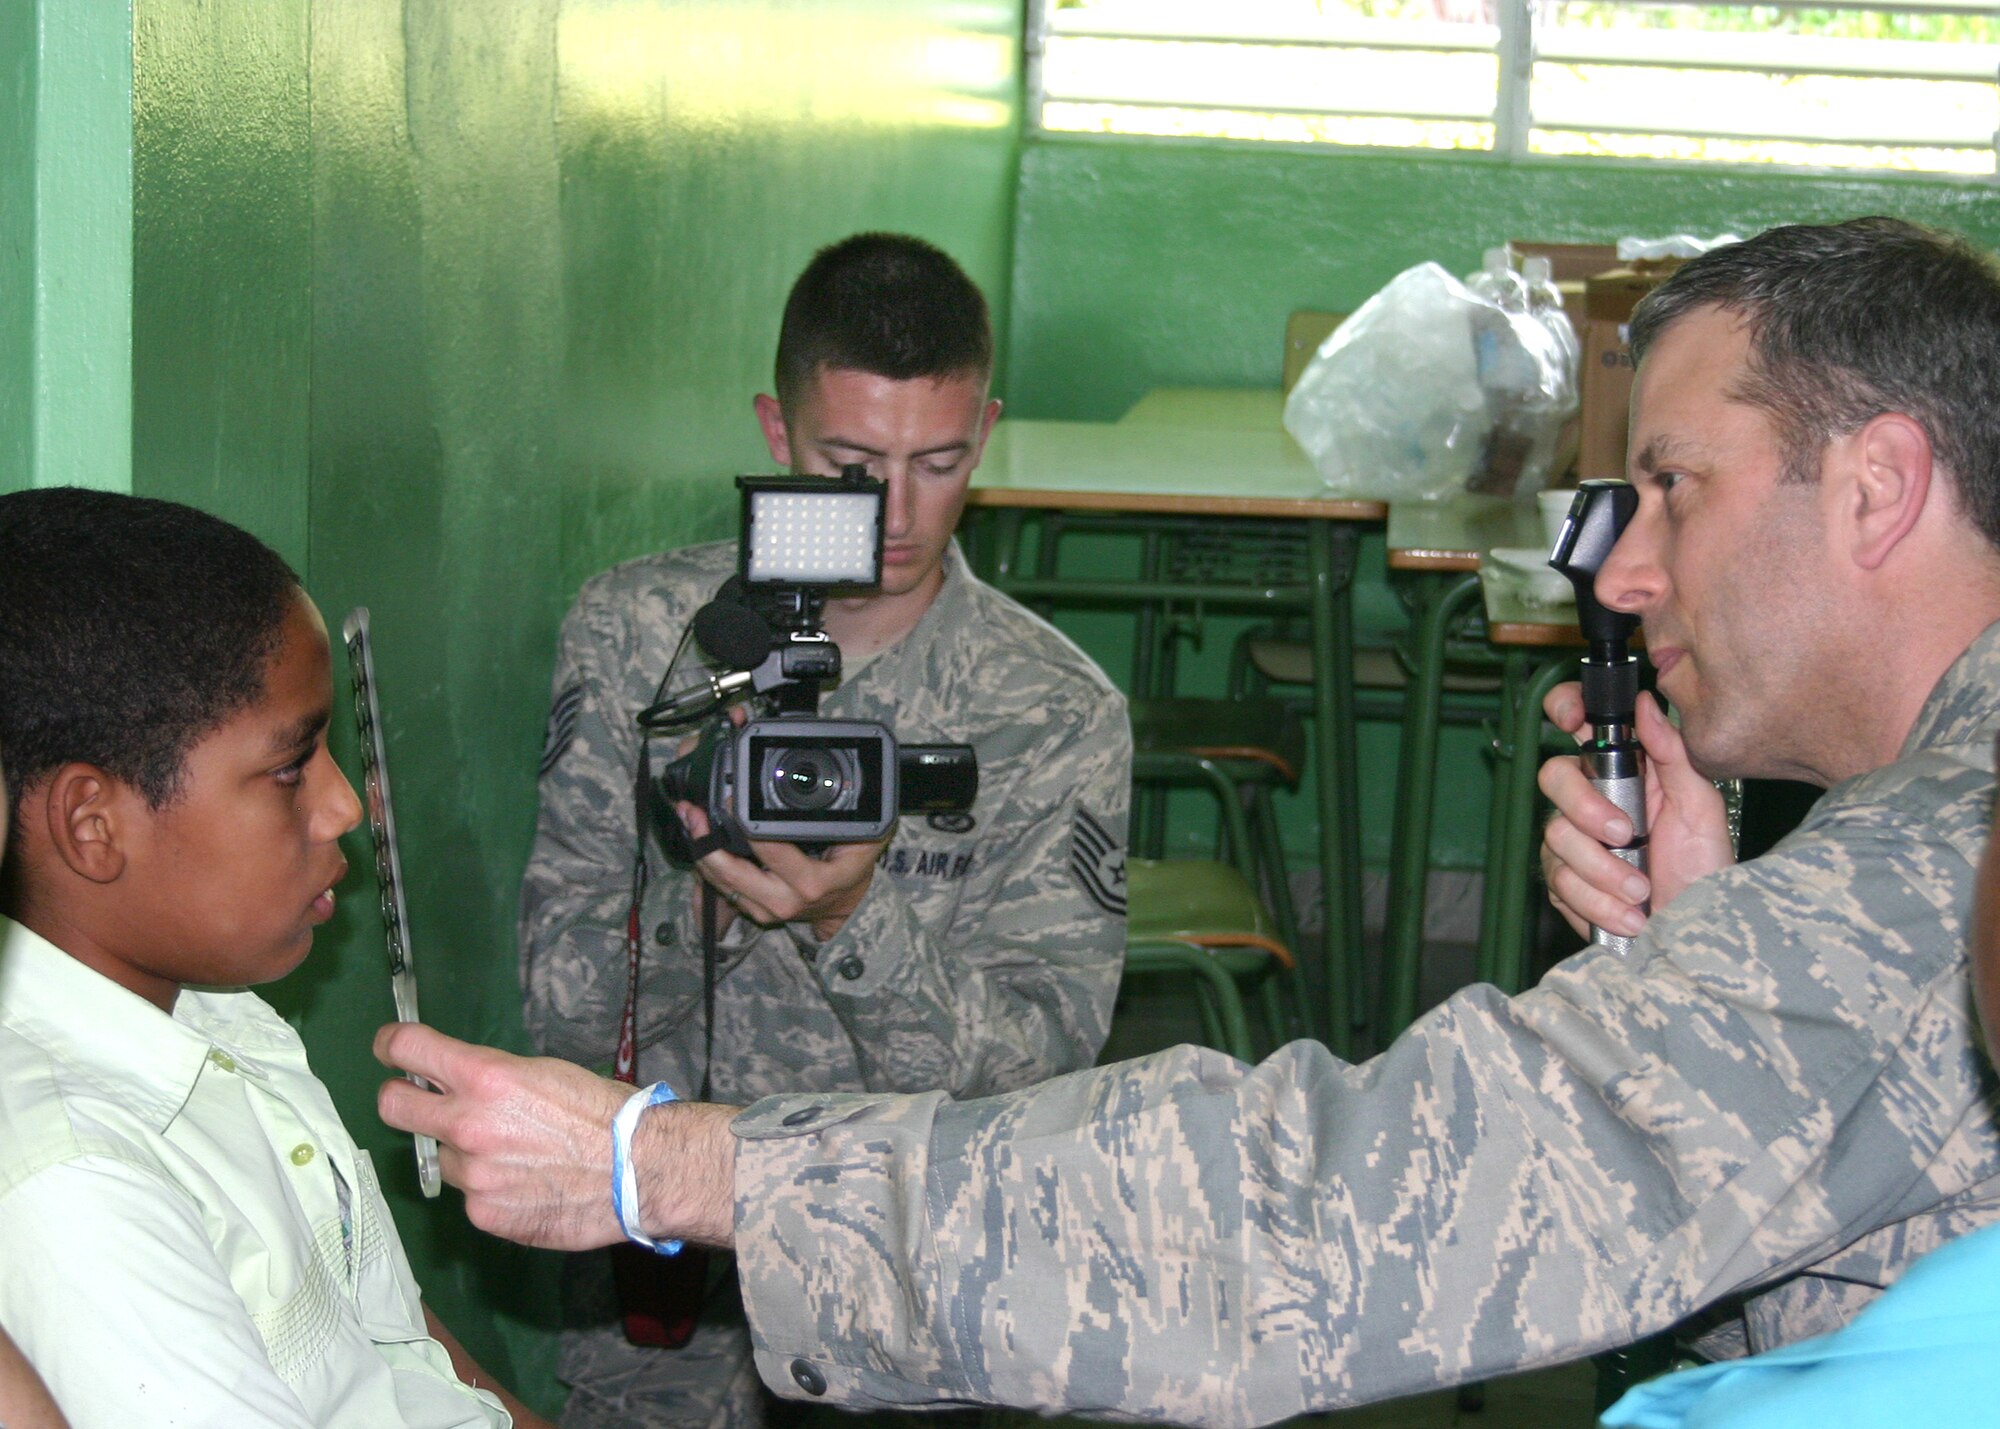 Tech. Sgt. Ken Raimondi videotapes Lt. Col. Christopher Rugaber performing an exam on a young boy in Padre de Las Casas, Dominican Republic. Colonel Rugaber is an optometrist assigned to the 910th Medical Squadron at Youngstown Air Reserve Station, Ohio. Sergeant Raimondi is the noncommissioned officer in charge of Air Force Recruiting Service Broadcast Operations. (U.S. Air Force photo/Dale Eckroth)